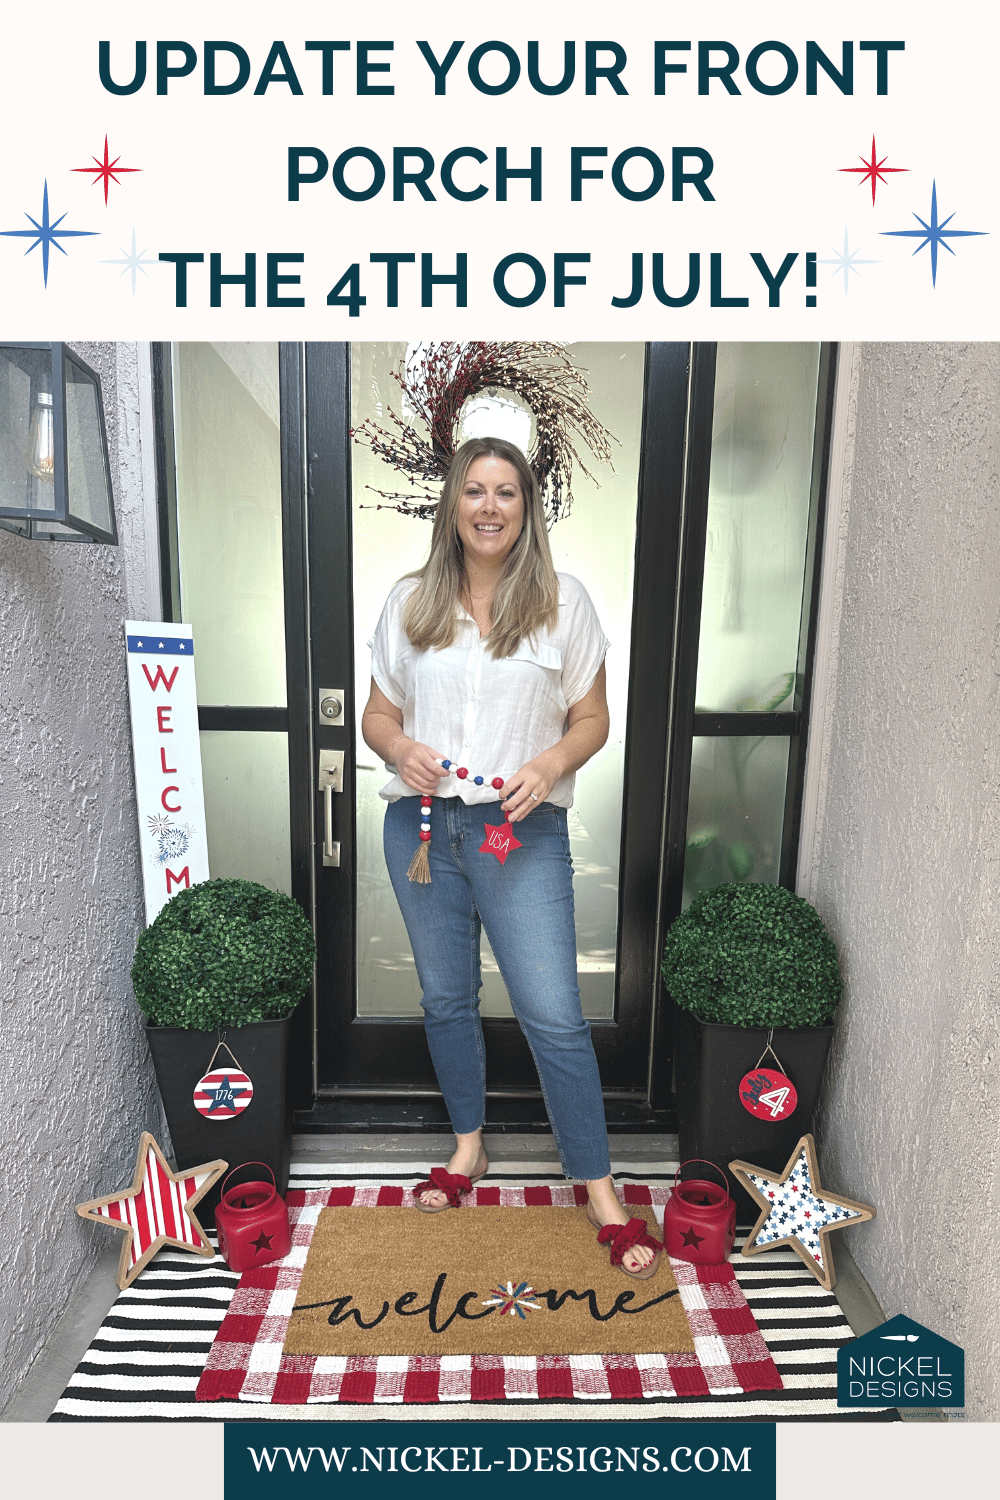 Patriotic Porch: 3 Tips to Amp up Your Front Porch Decor for the 4th of July!